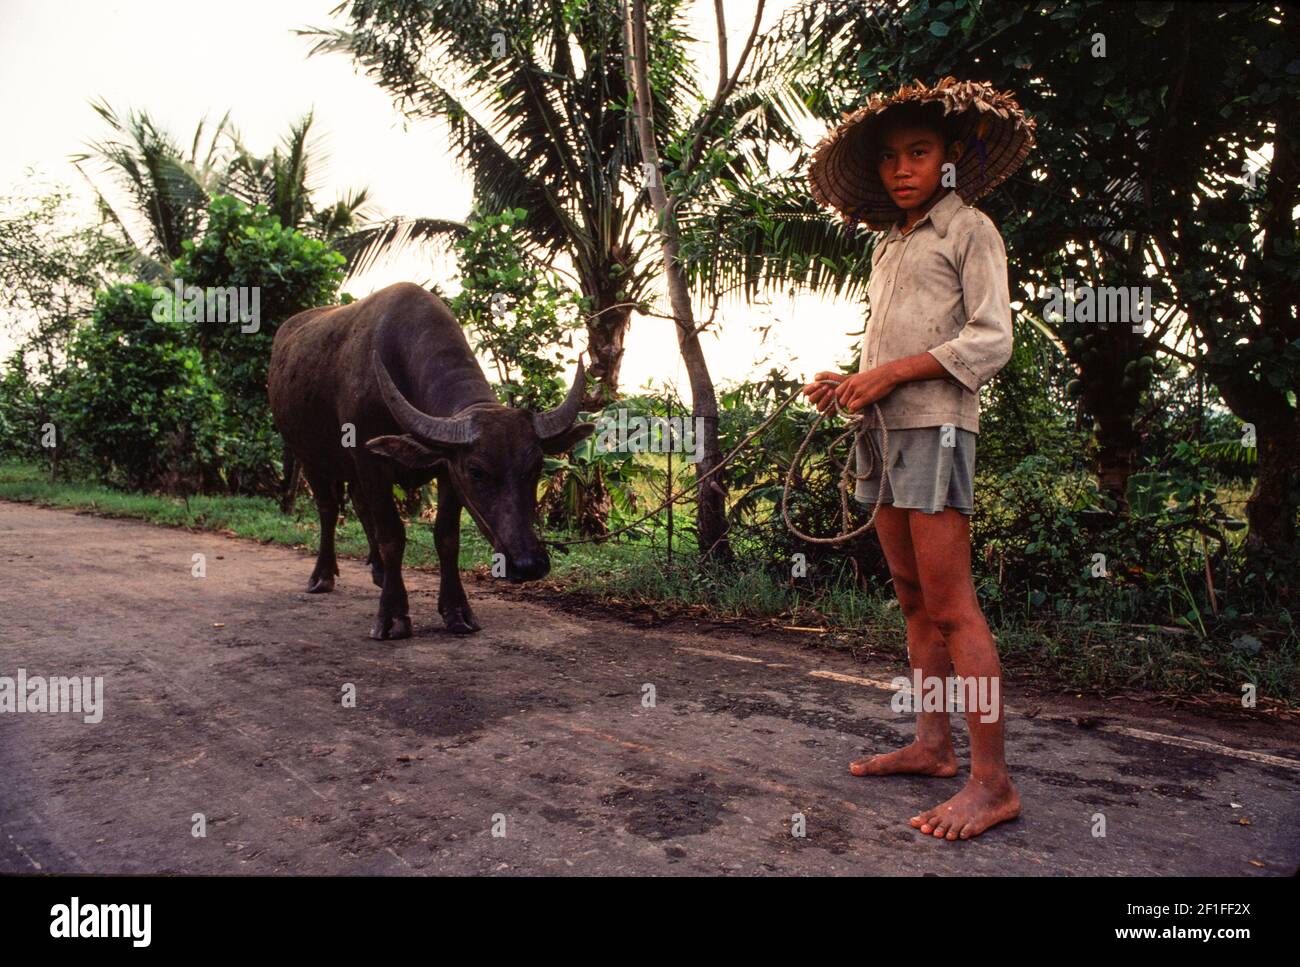 A young boy leading an ox, rural South Vietnam.  In the harvest season oxen are used for ploughing rice paddies and to drag rollers for threshing rice. Stock Photo